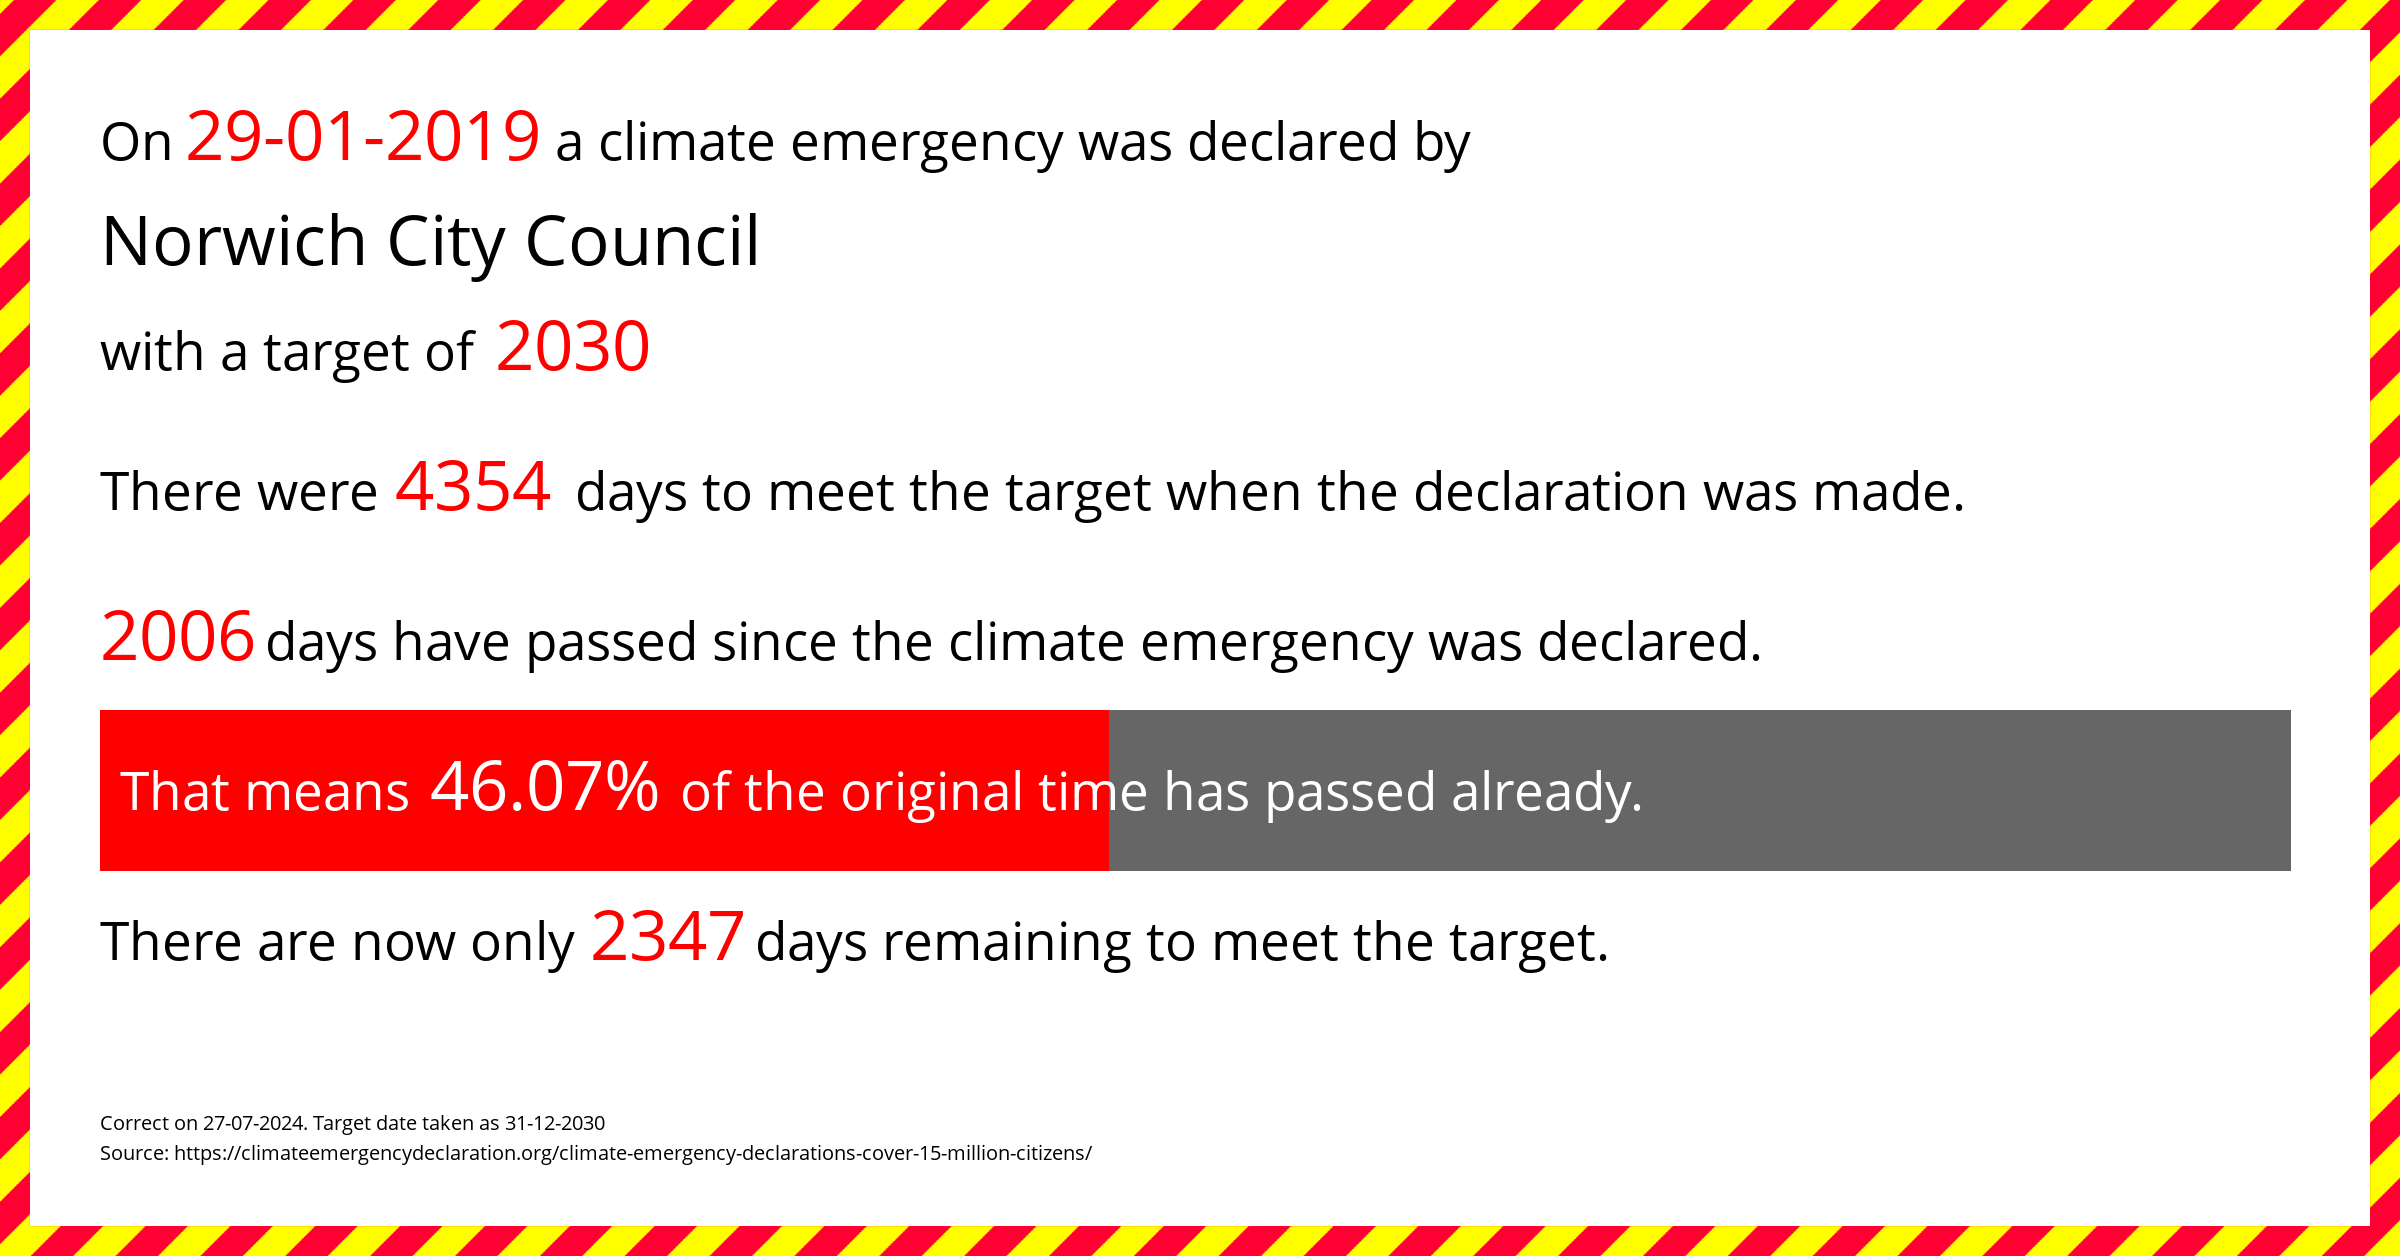 Norwich City Council declared a Climate emergency on Tuesday 29th January 2019, with a target of 2030.